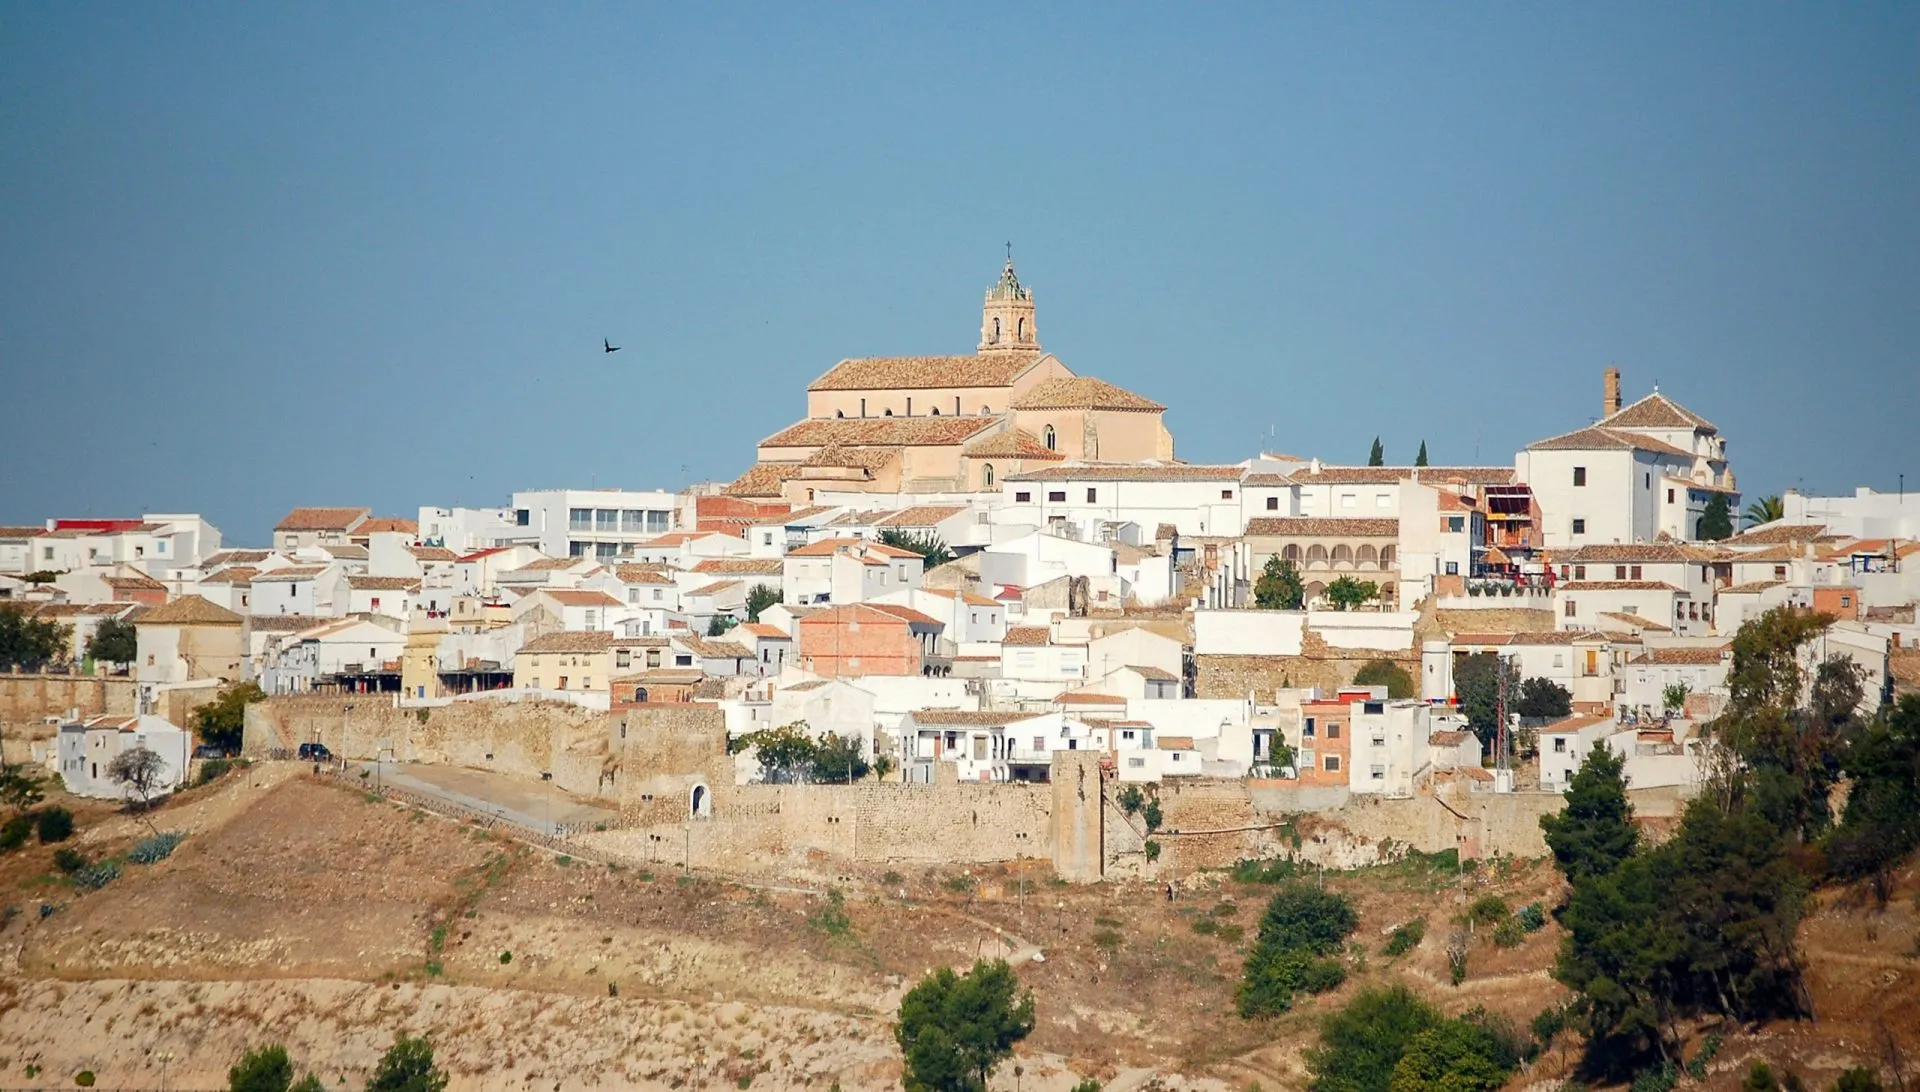 The Church of Santa Maria la Mayor between whitewashed houses and the blue sky - Baena, Andalusia, Spain